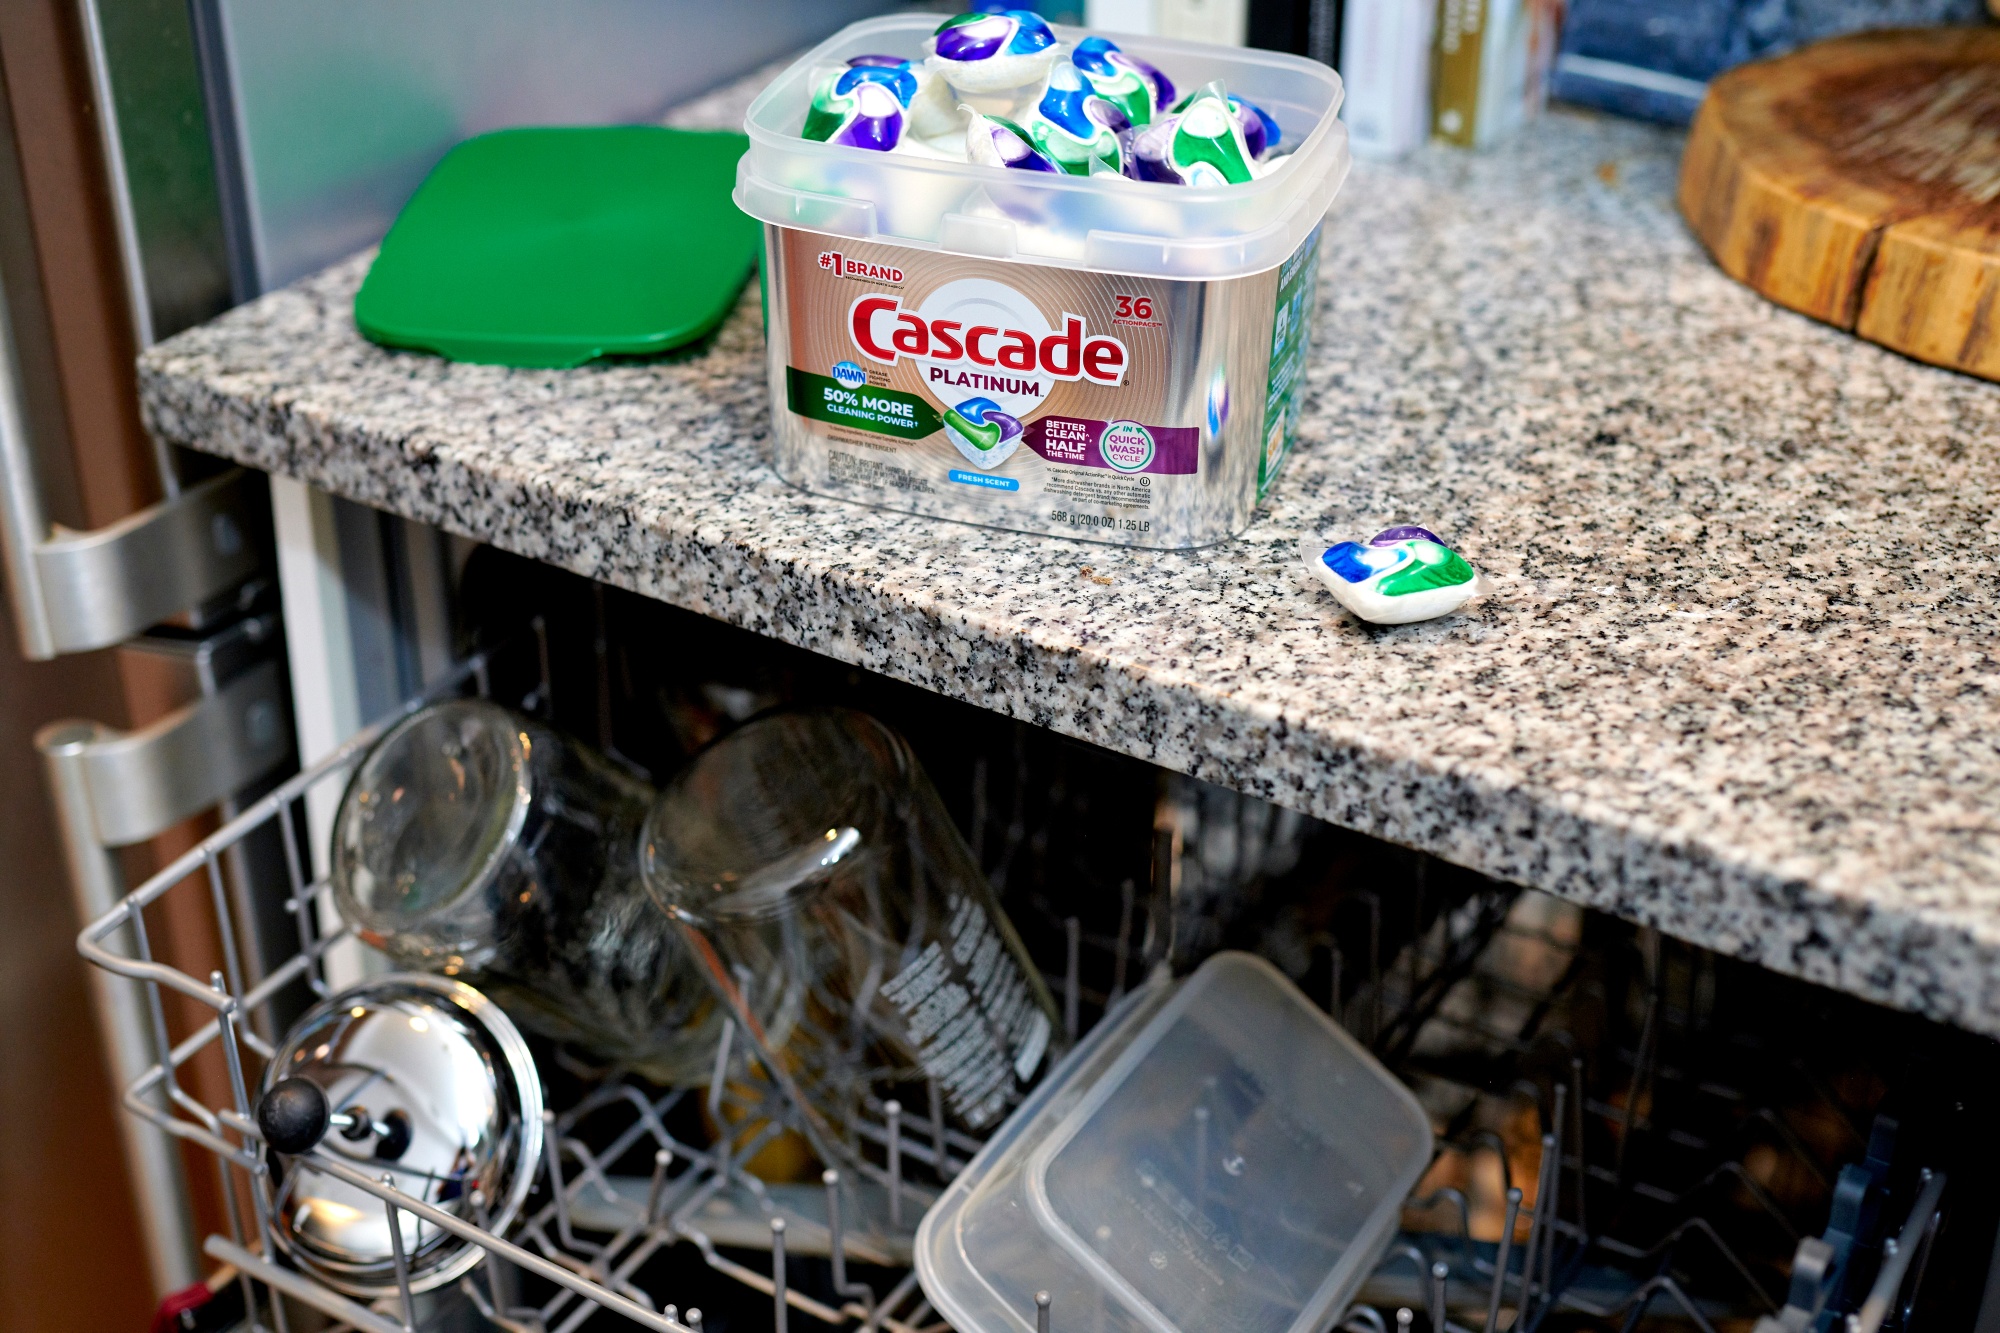 Cascade, a nearly 70-year-old brand, is trying to convince&nbsp;consumers to use&nbsp;their dishwashers more often.